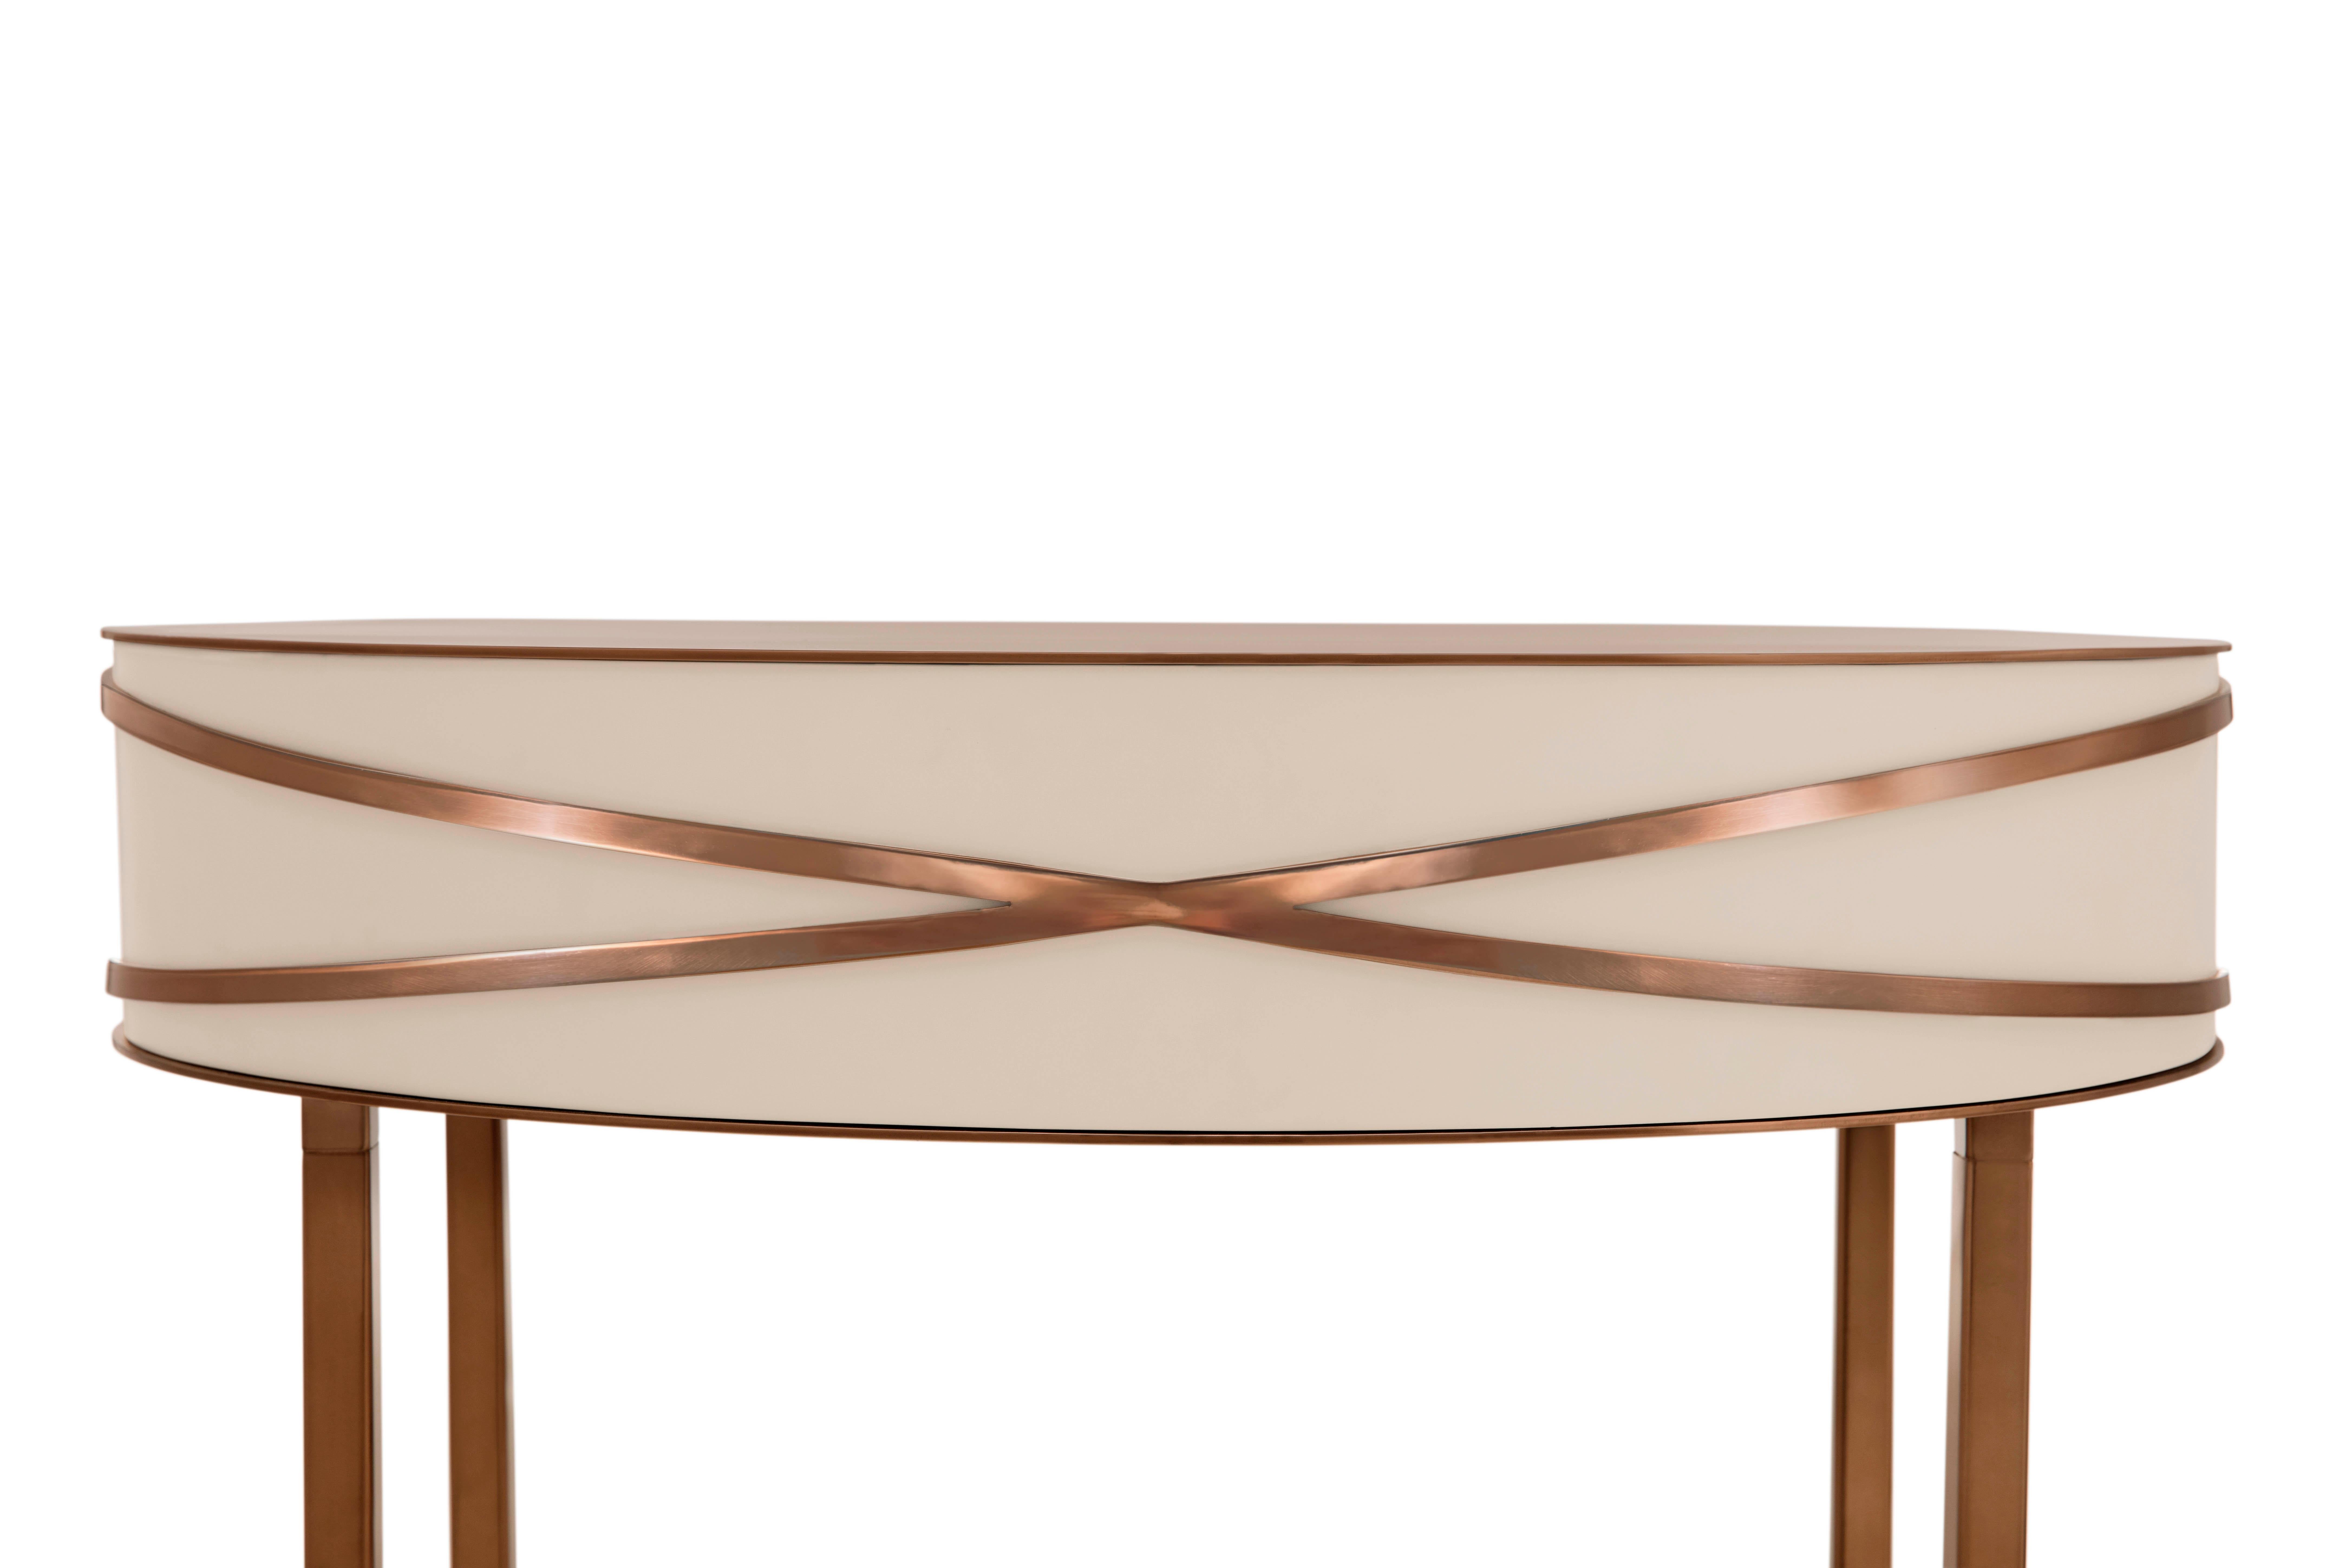 Stella Gray Console or Bedside Table with Rose Gold Trims by Nika Zupanc is a chic gray table with a drawer and rose gold metal trims.

Nika Zupanc, a strikingly renowned Slovenian designer, never shies away from redefining the status quo of design,